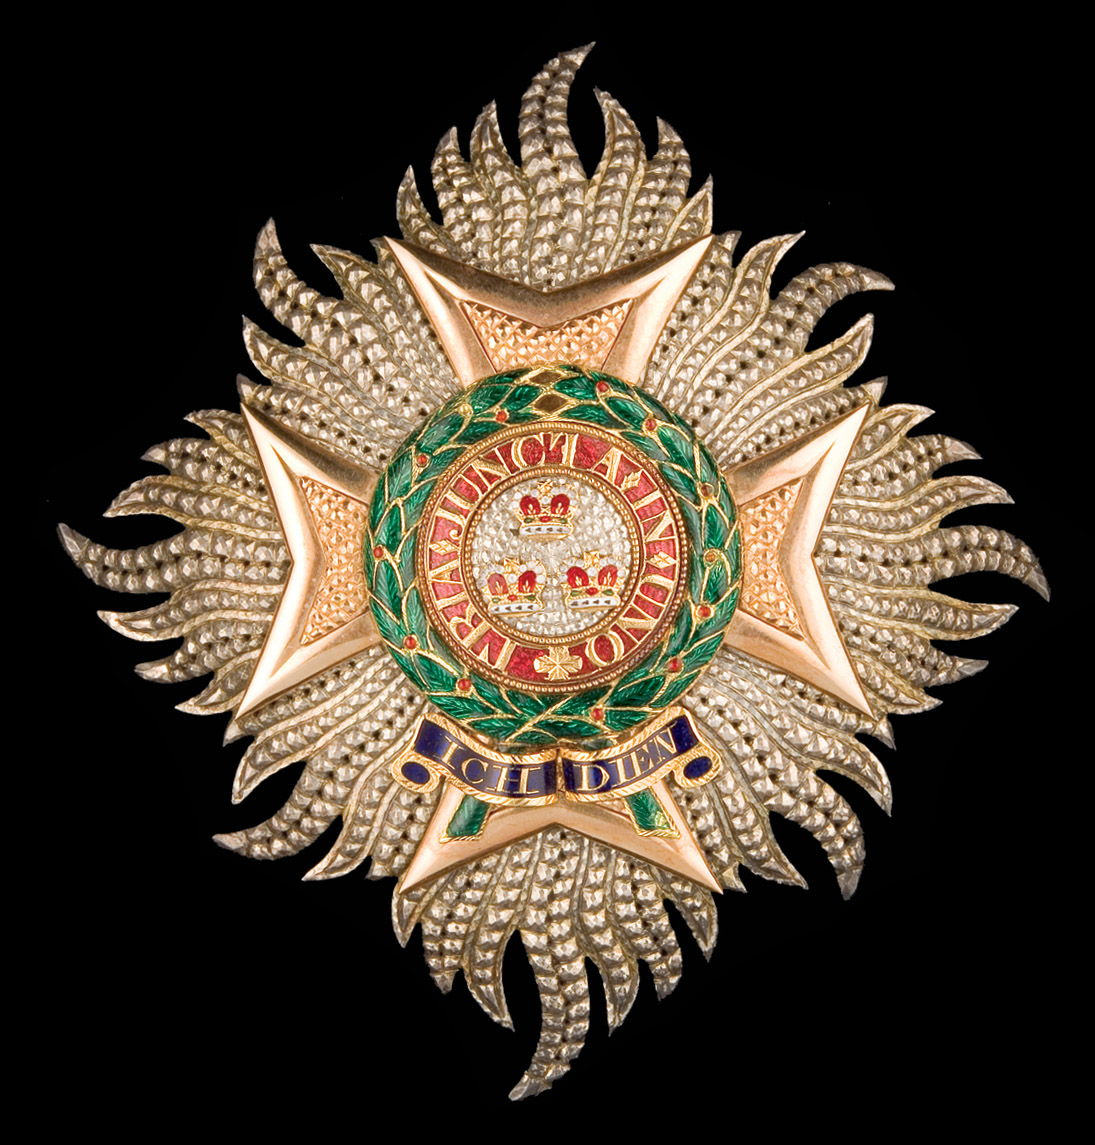 *The Most Honourable Order of the Bath, Military Division, Knight Grand Cross breast star, circa